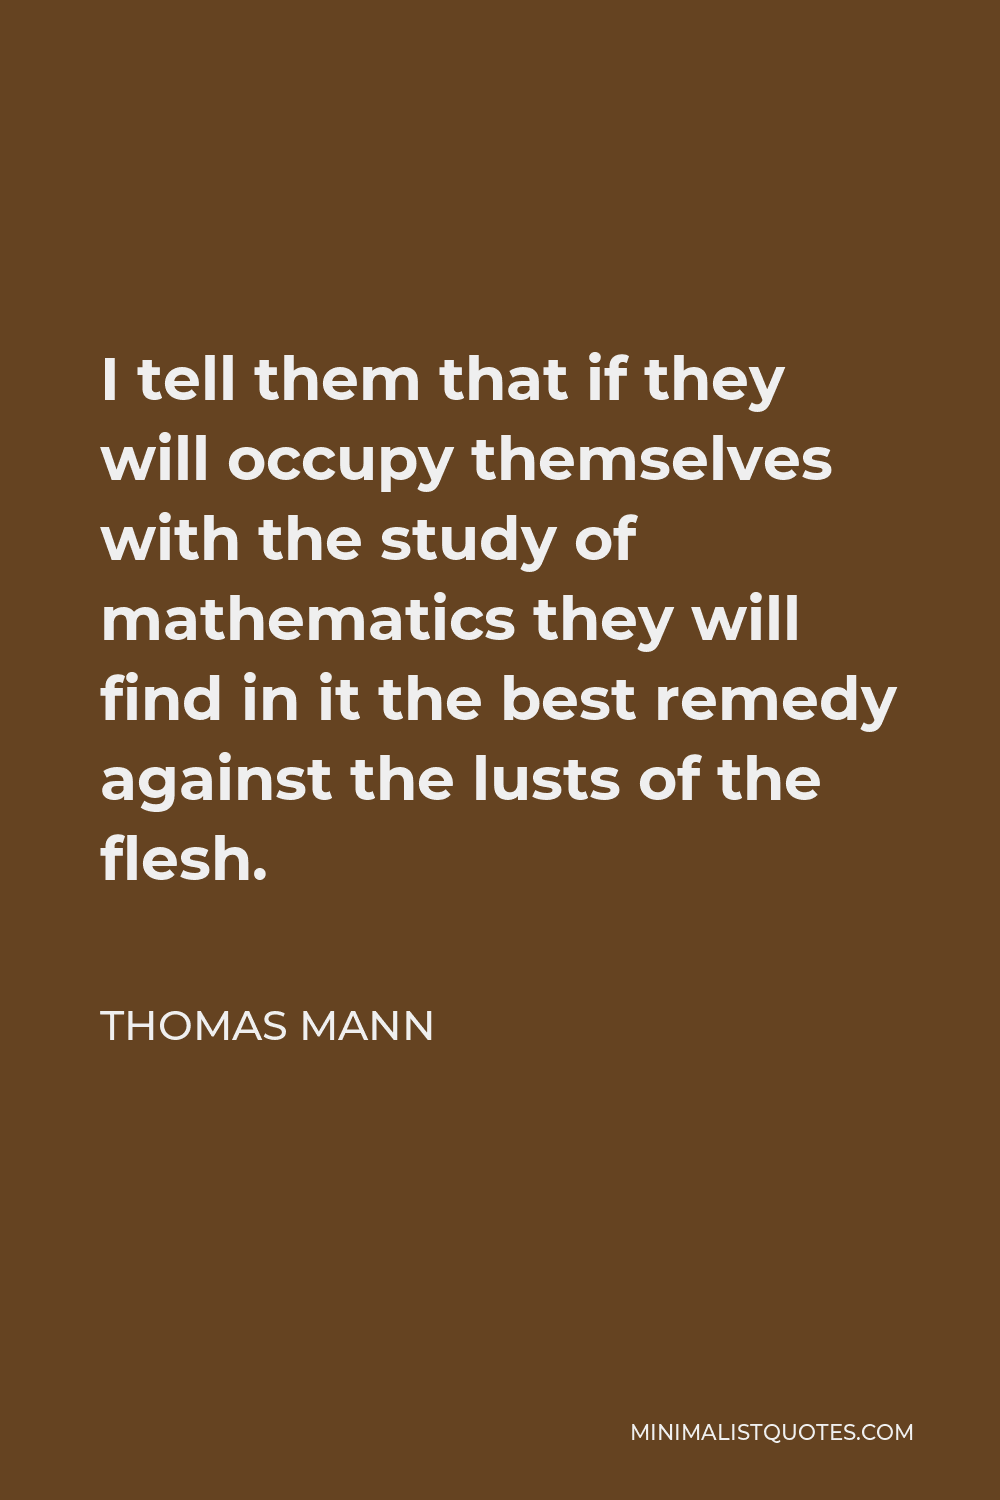 Thomas Mann Quote - I tell them that if they will occupy themselves with the study of mathematics they will find in it the best remedy against the lusts of the flesh.